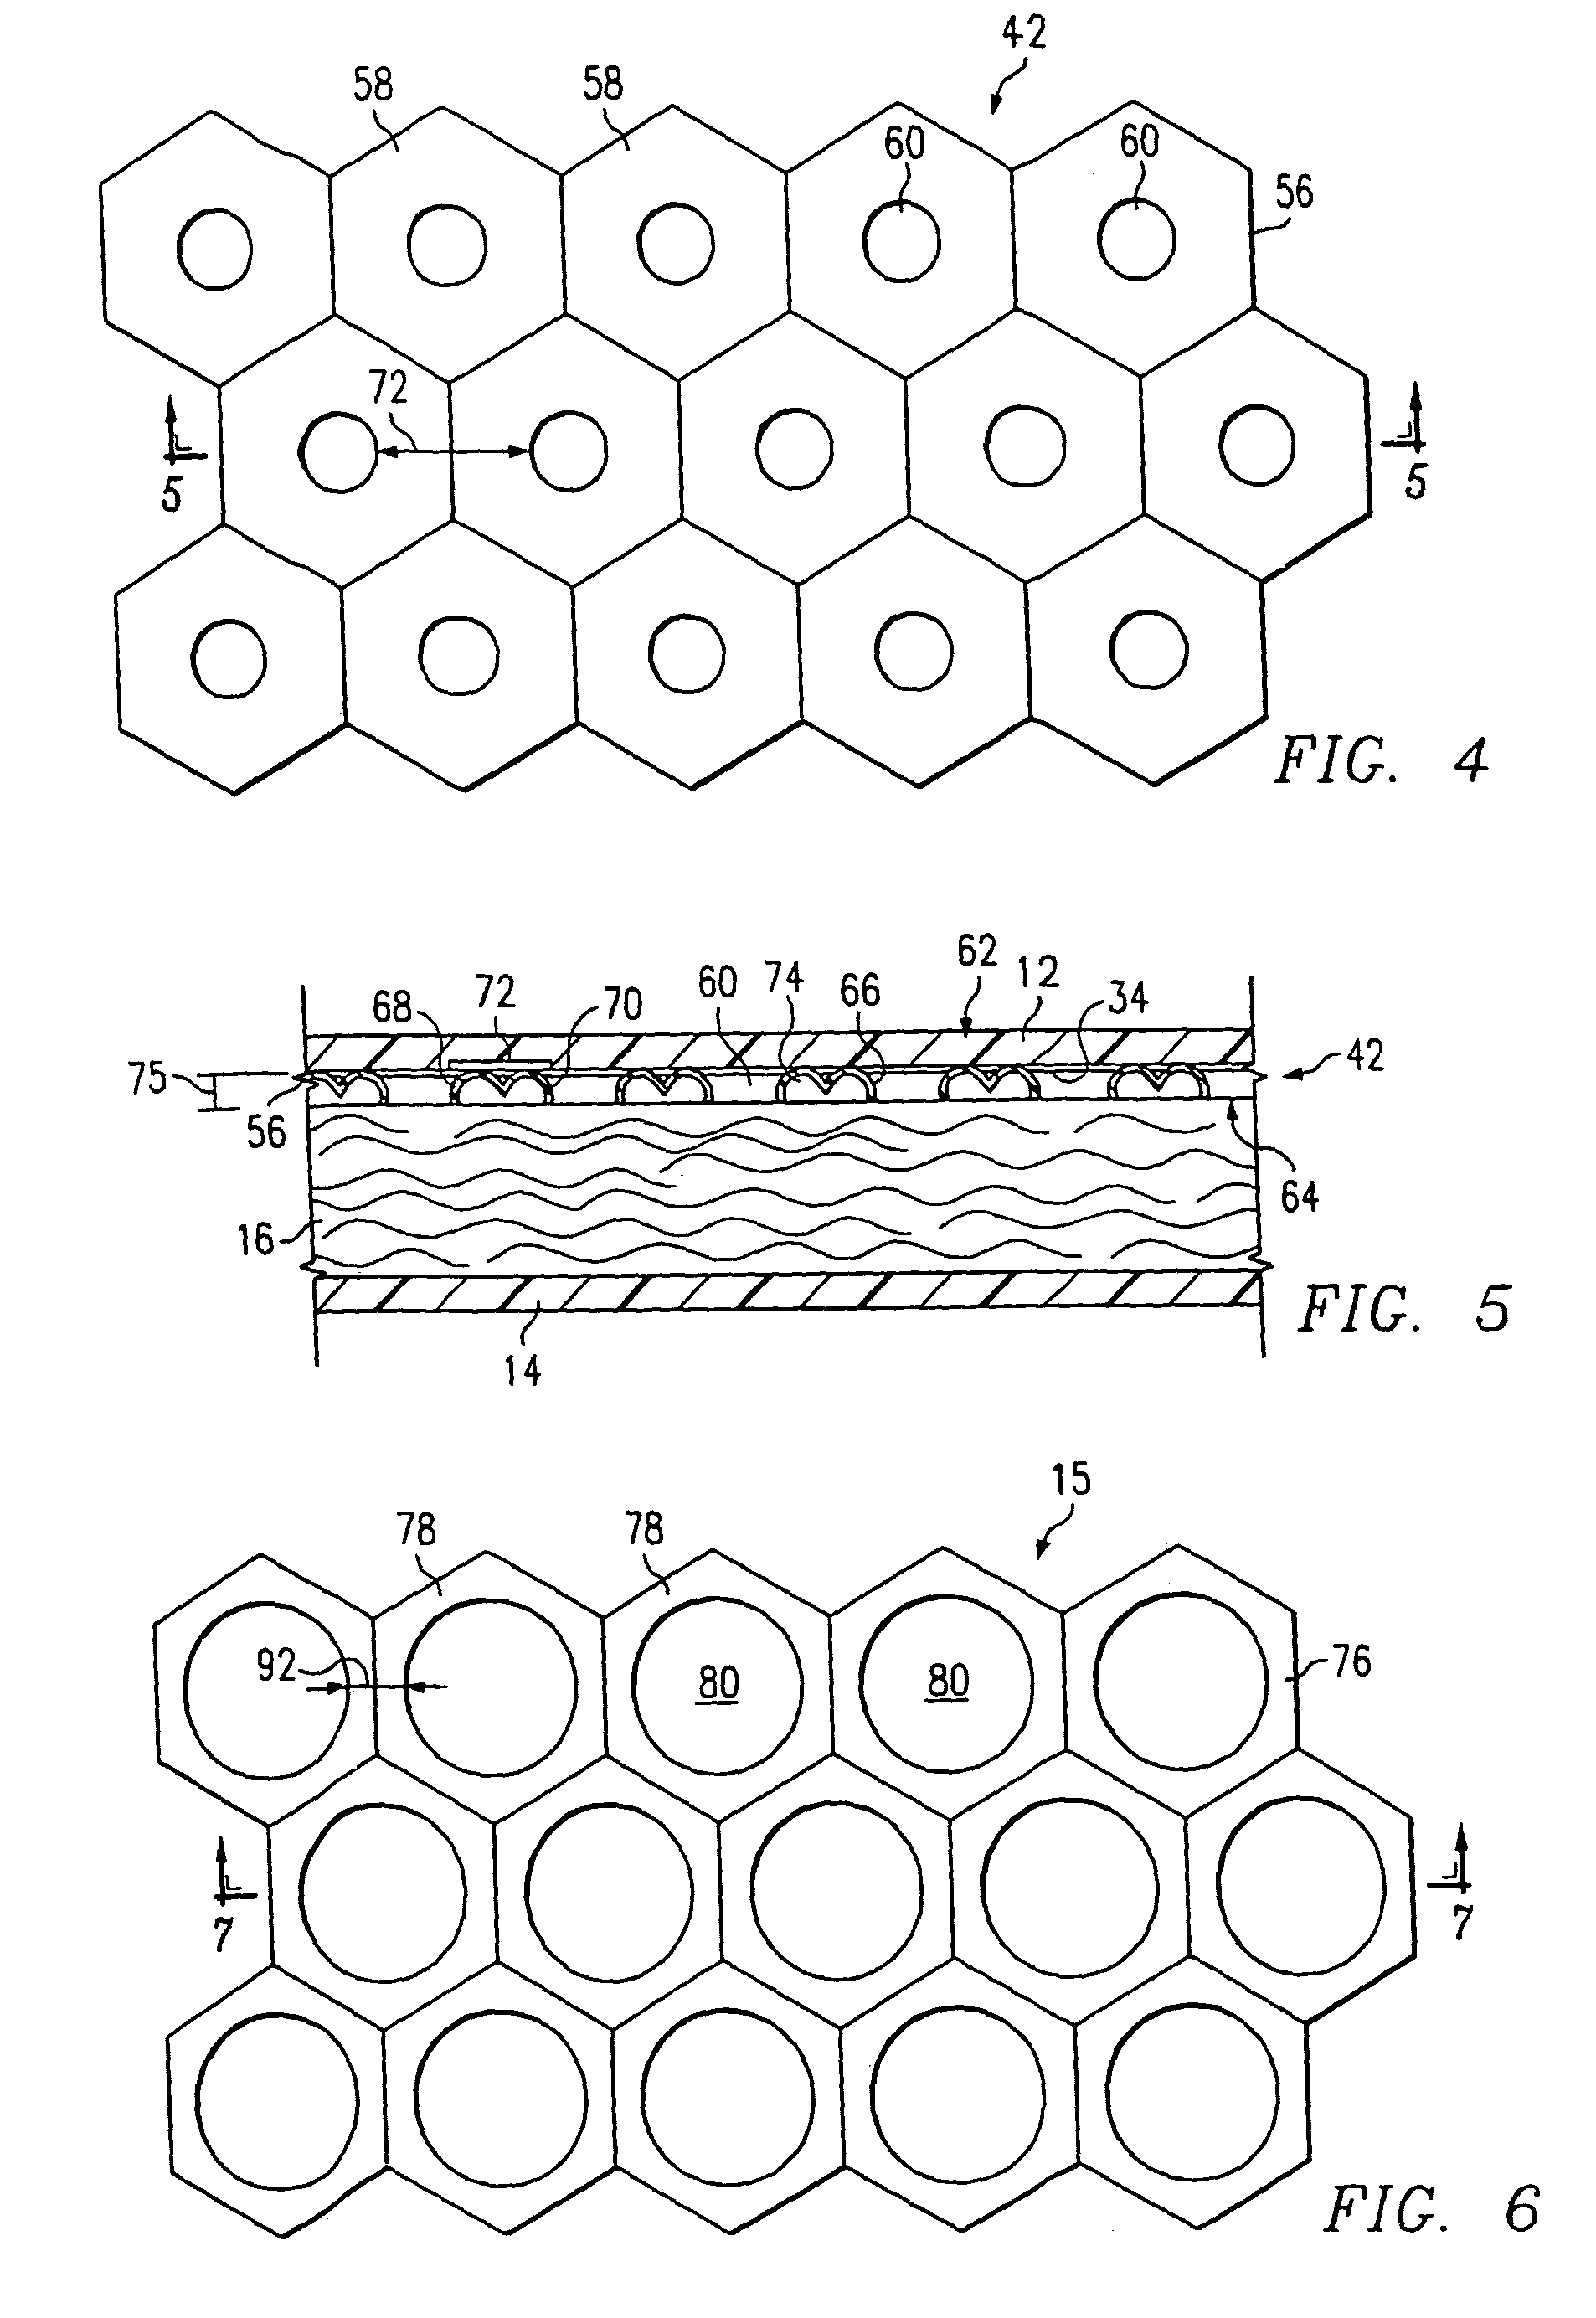 Acquisition distribution layer having void volumes for an absorbent article